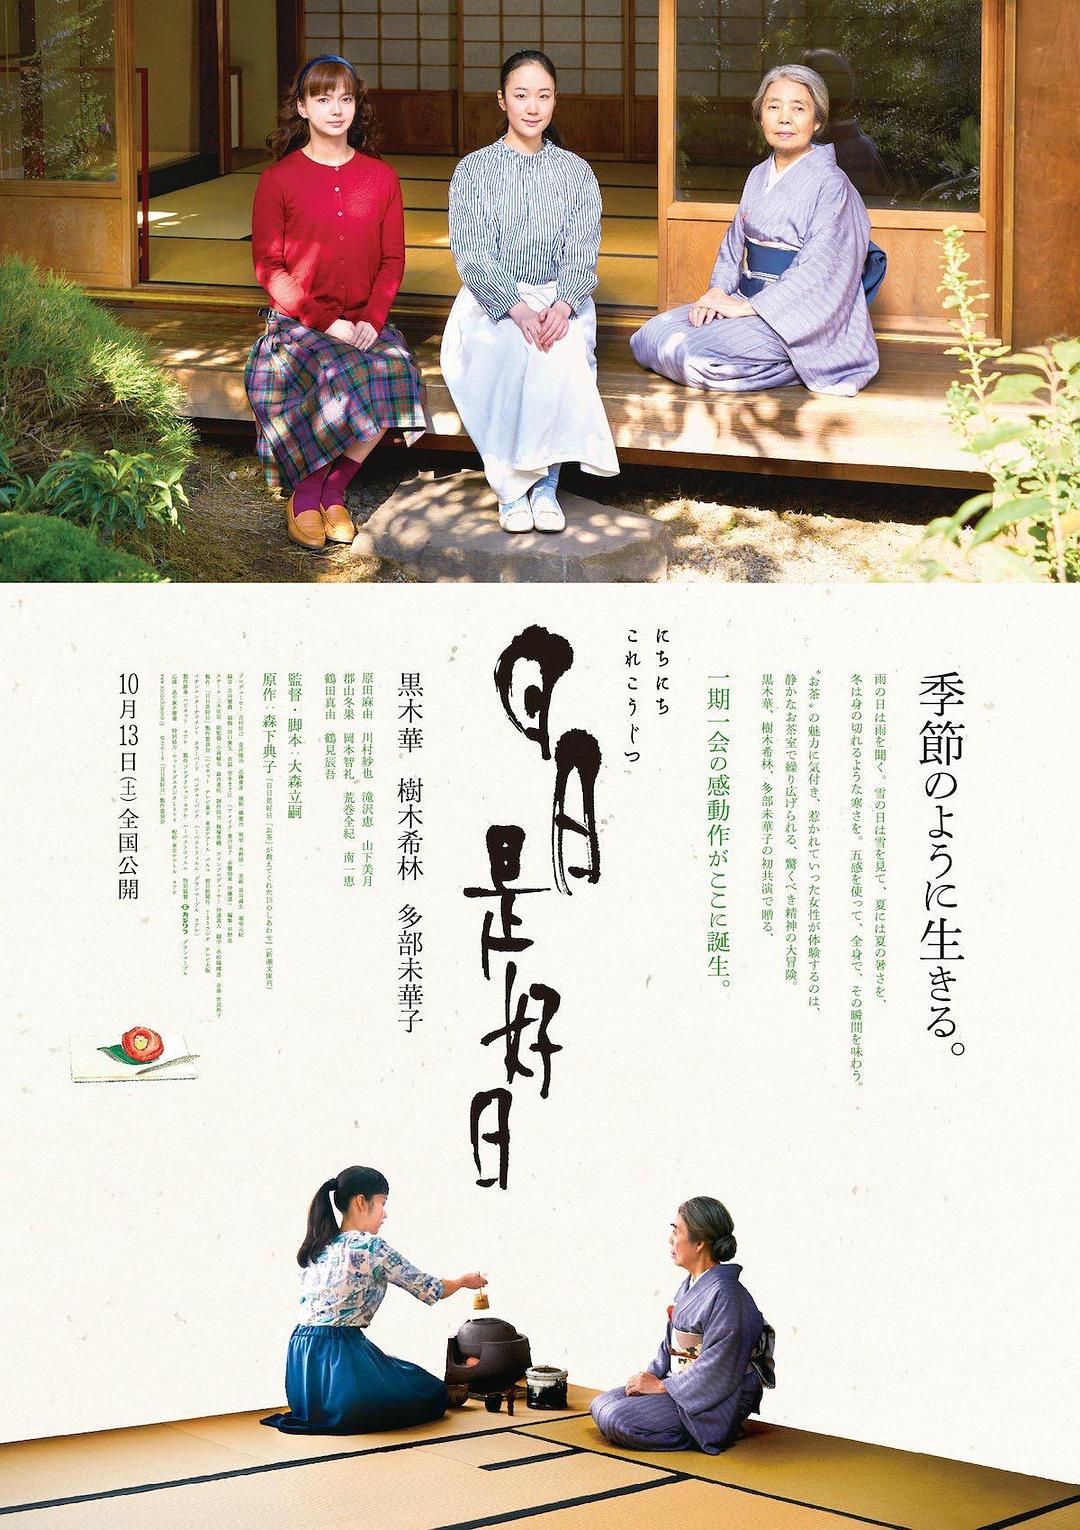 Every Day a Good Day/天天是个好日子 Every.Day.A.Good.Day.2018.JAPANESE.720p.BluRay.X264-WiKi 4.00GB-1.png